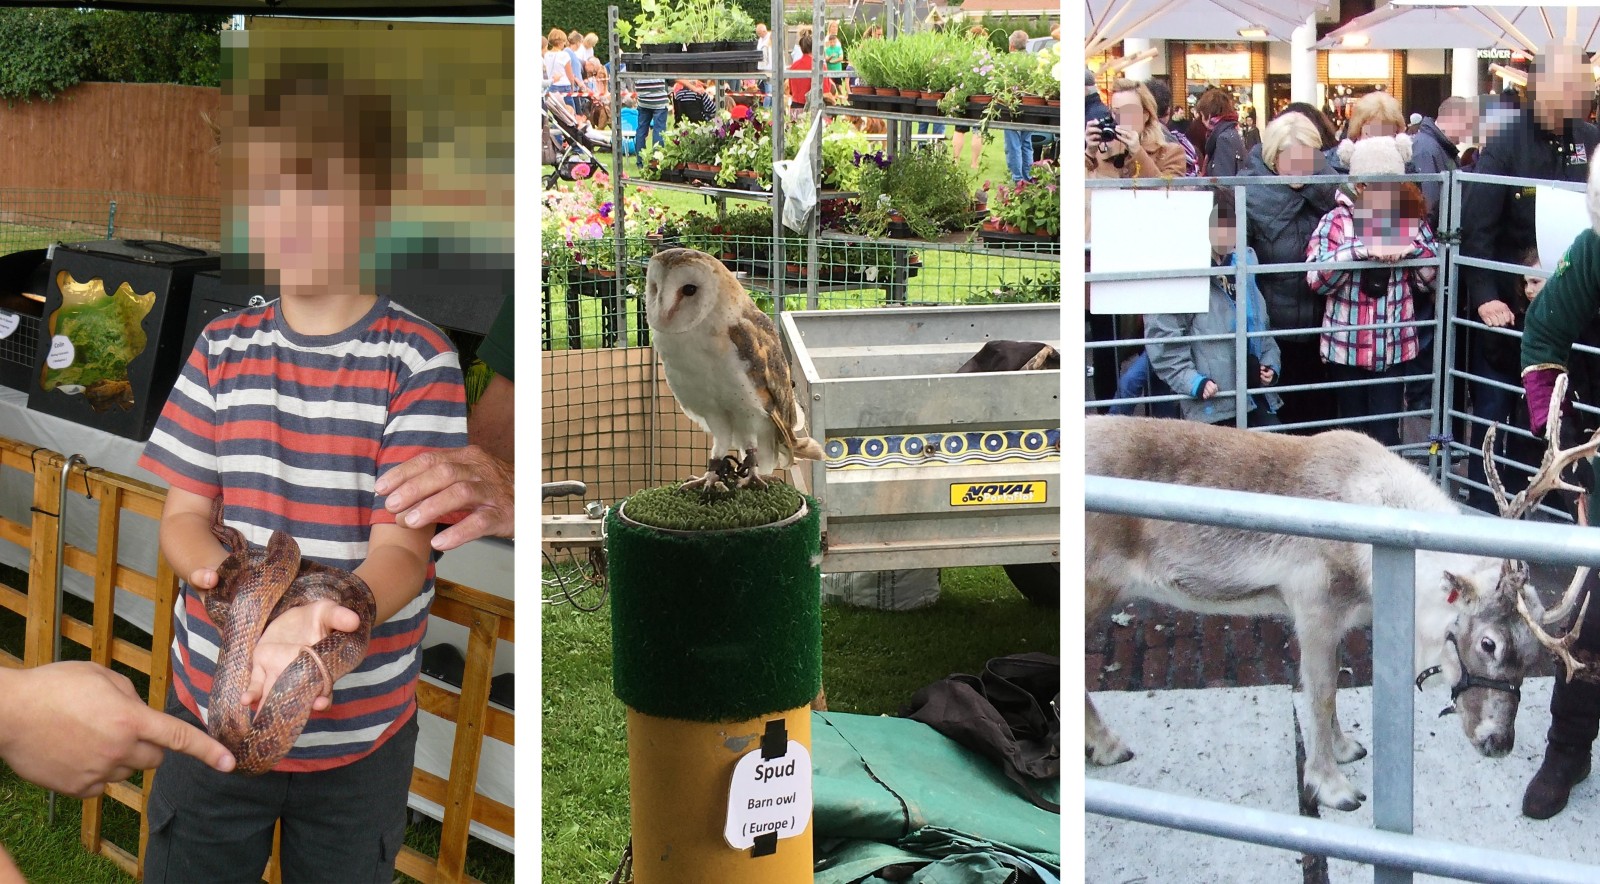 Three images. Left shows a young white boy wearing a striped t-shirt, holding a snake. His face is blurred. Centre, is a photo of an owl in a cage, in a garden centre setting, with people in the background. Right is a crowed scene with multiple people and children gathering around a metal fence. Inside two reindeer are being handled by keepers.